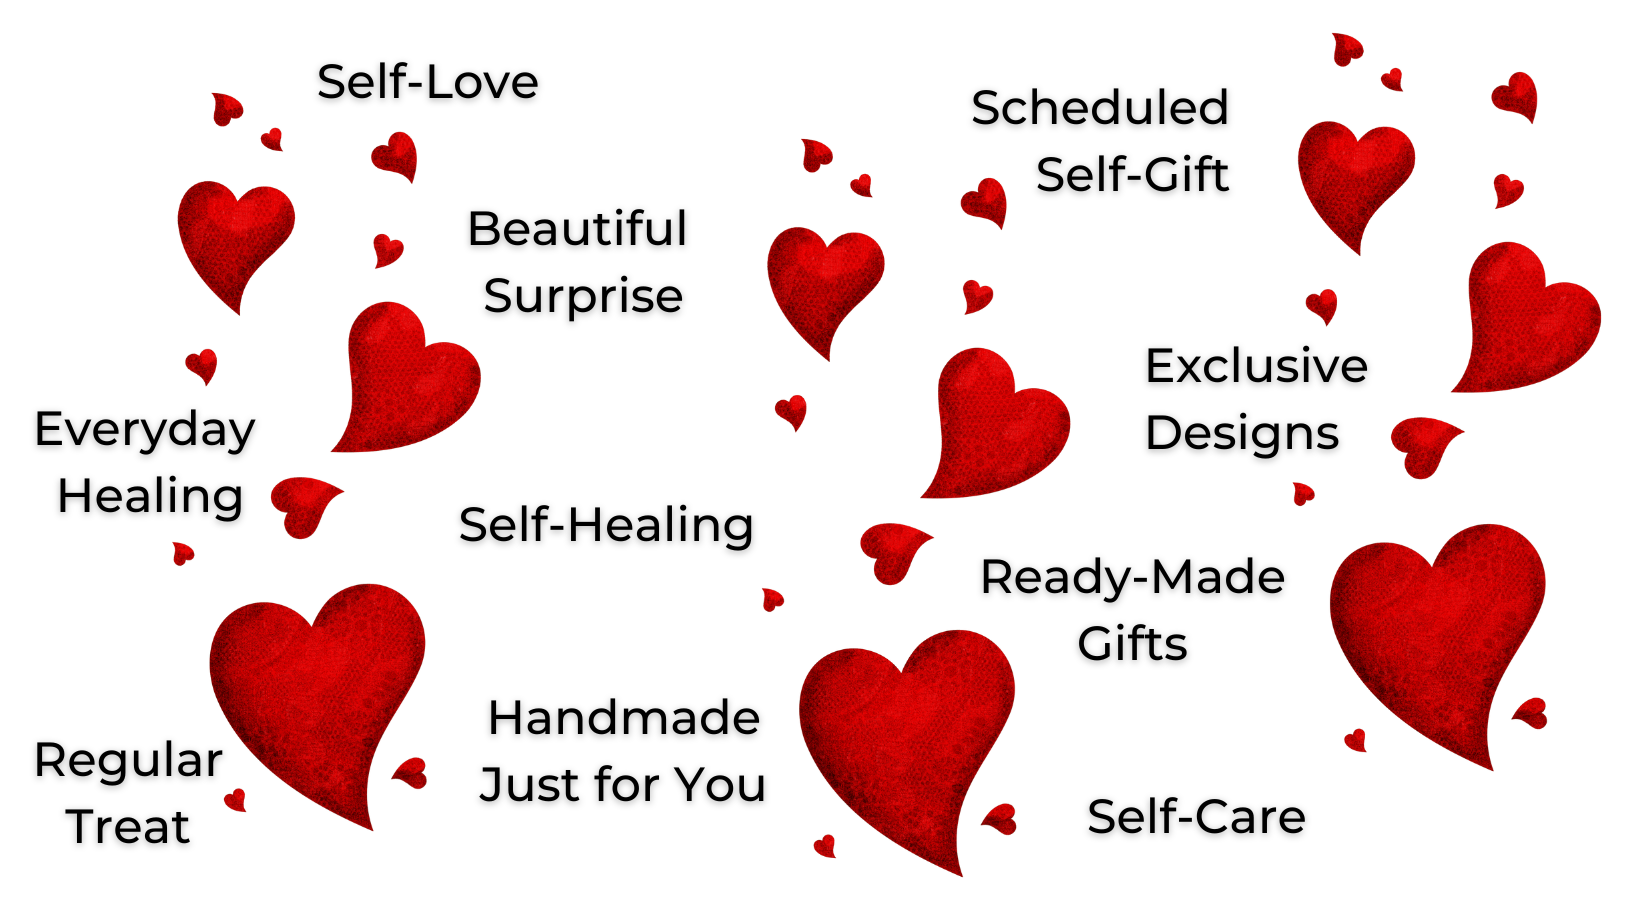 Self-Love, Scheduled Self-Gift, Beautiful Sirprise, Everyday Healing, Self-Healing, Exclusive Designs, Ready-Made Gifts, Regular Treat, Handmade Just for You, Self-Care